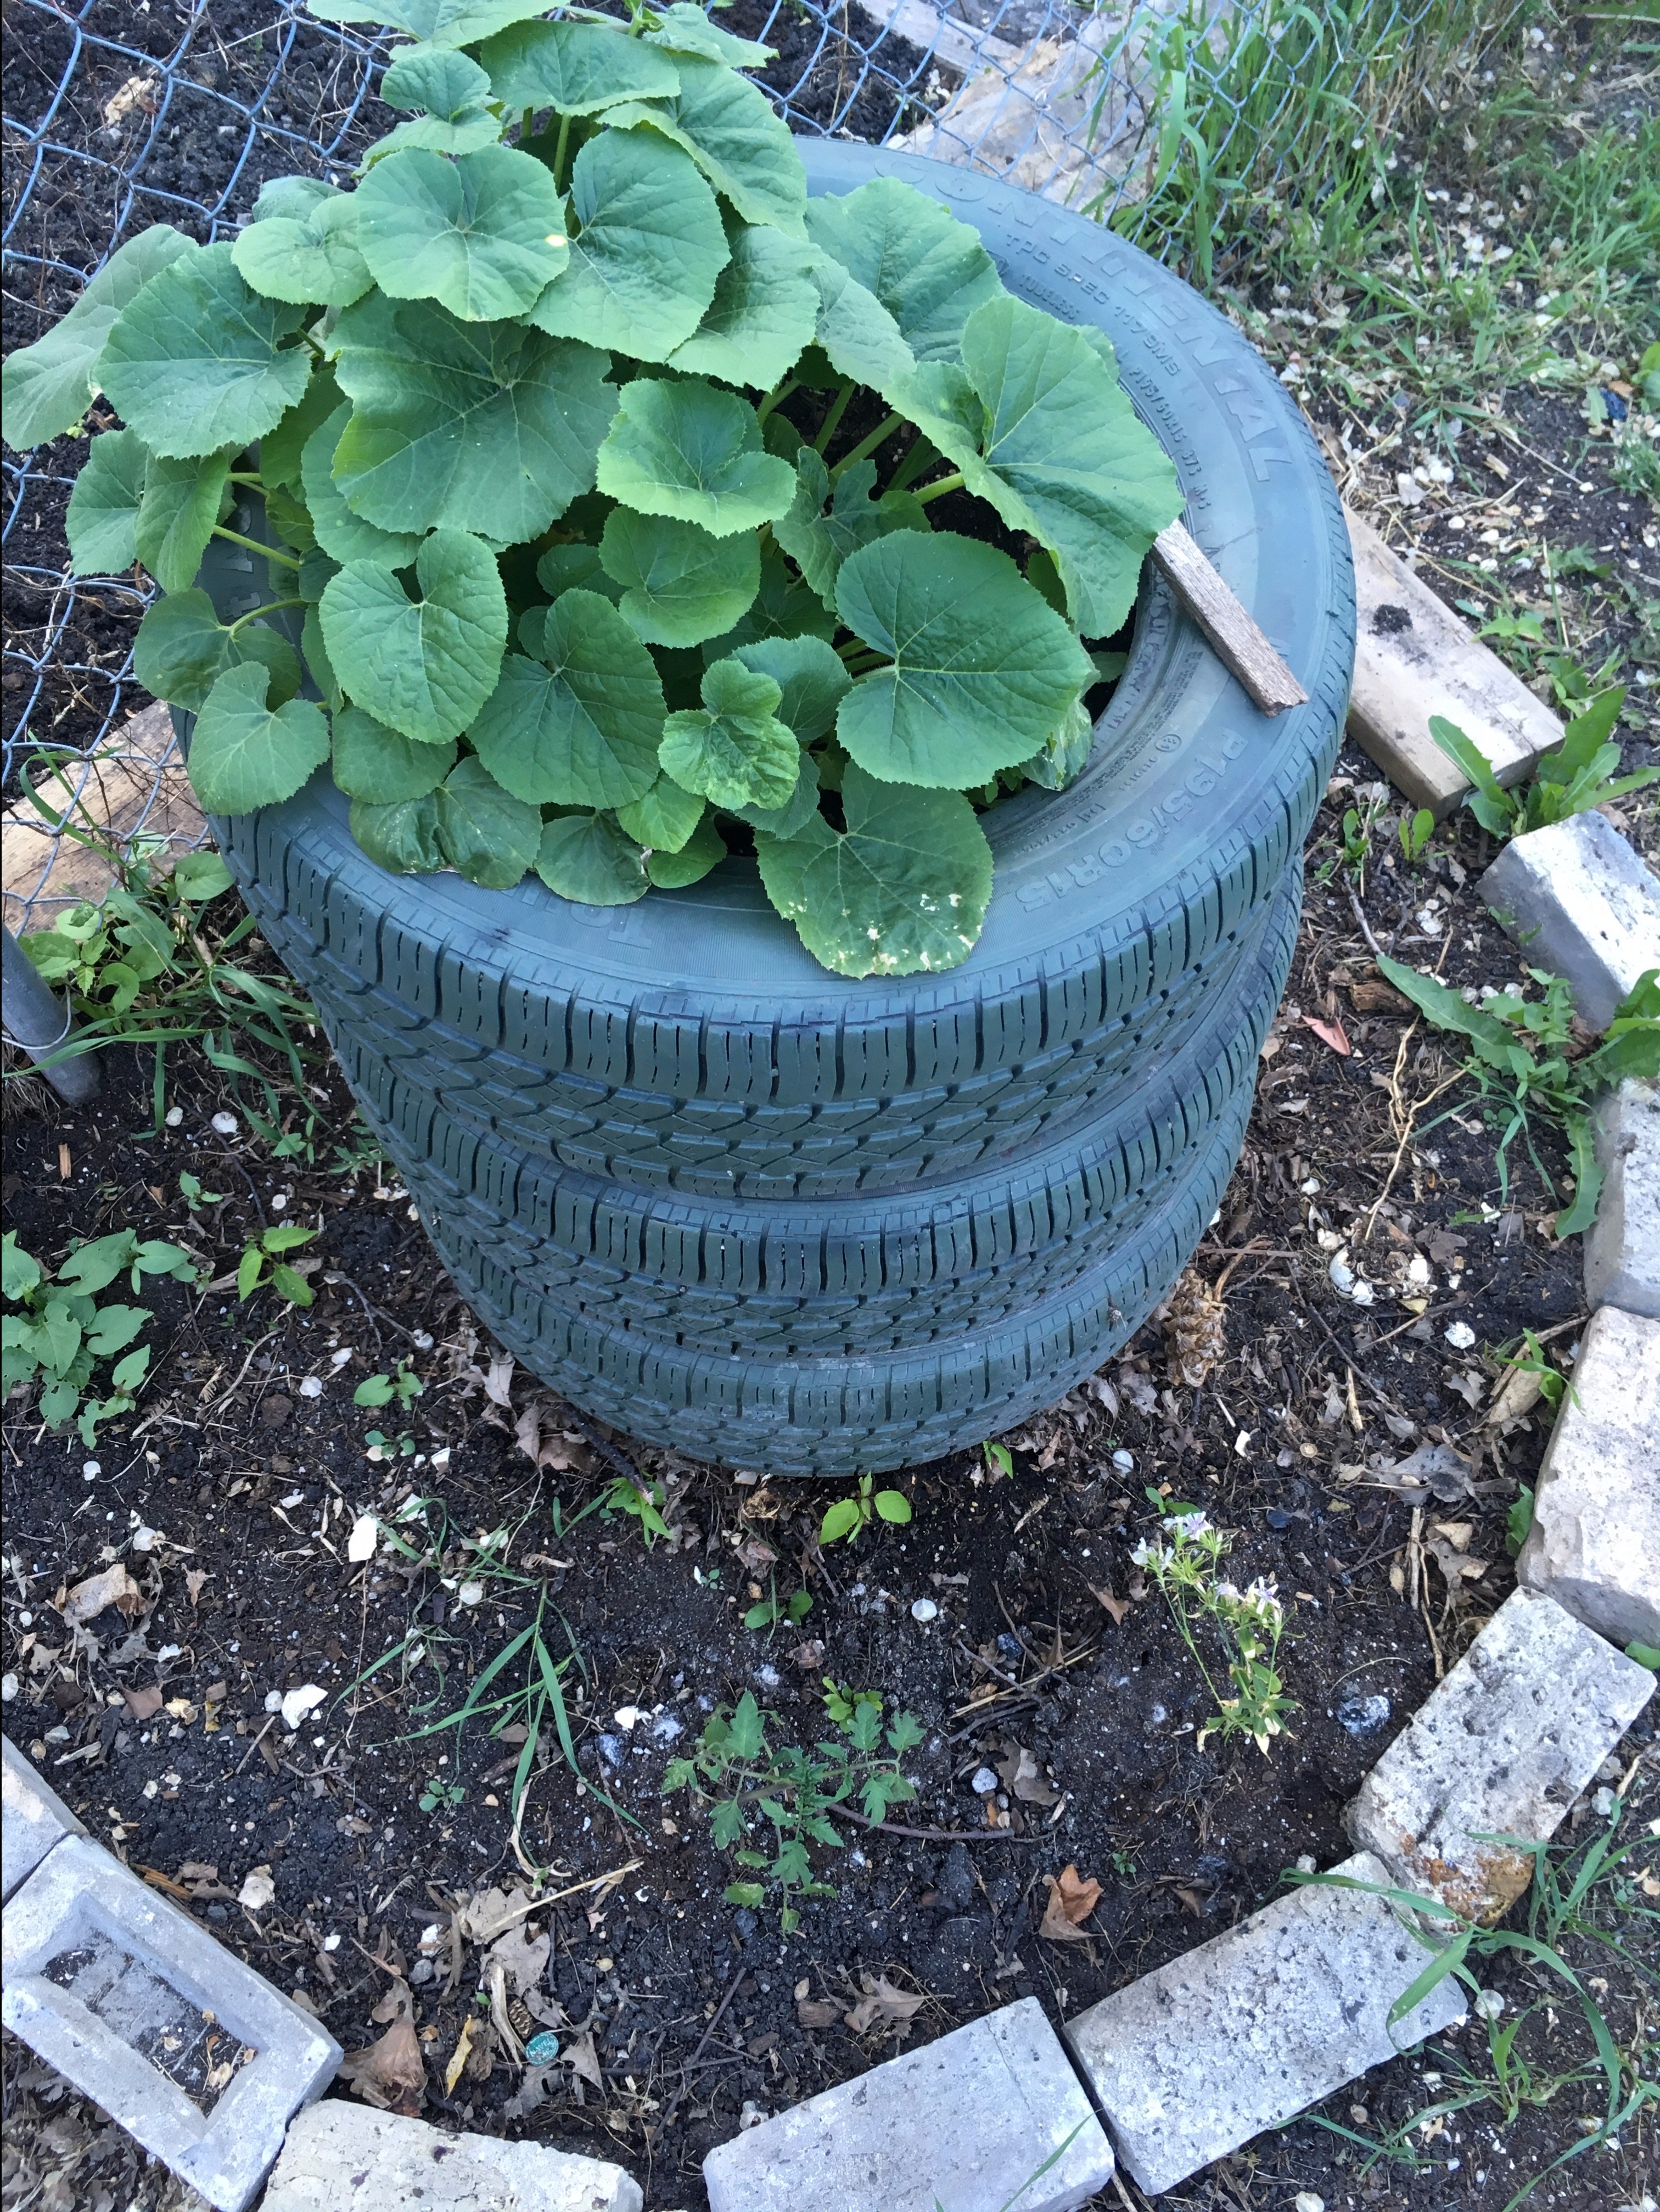 Squash are growing out of my old tires